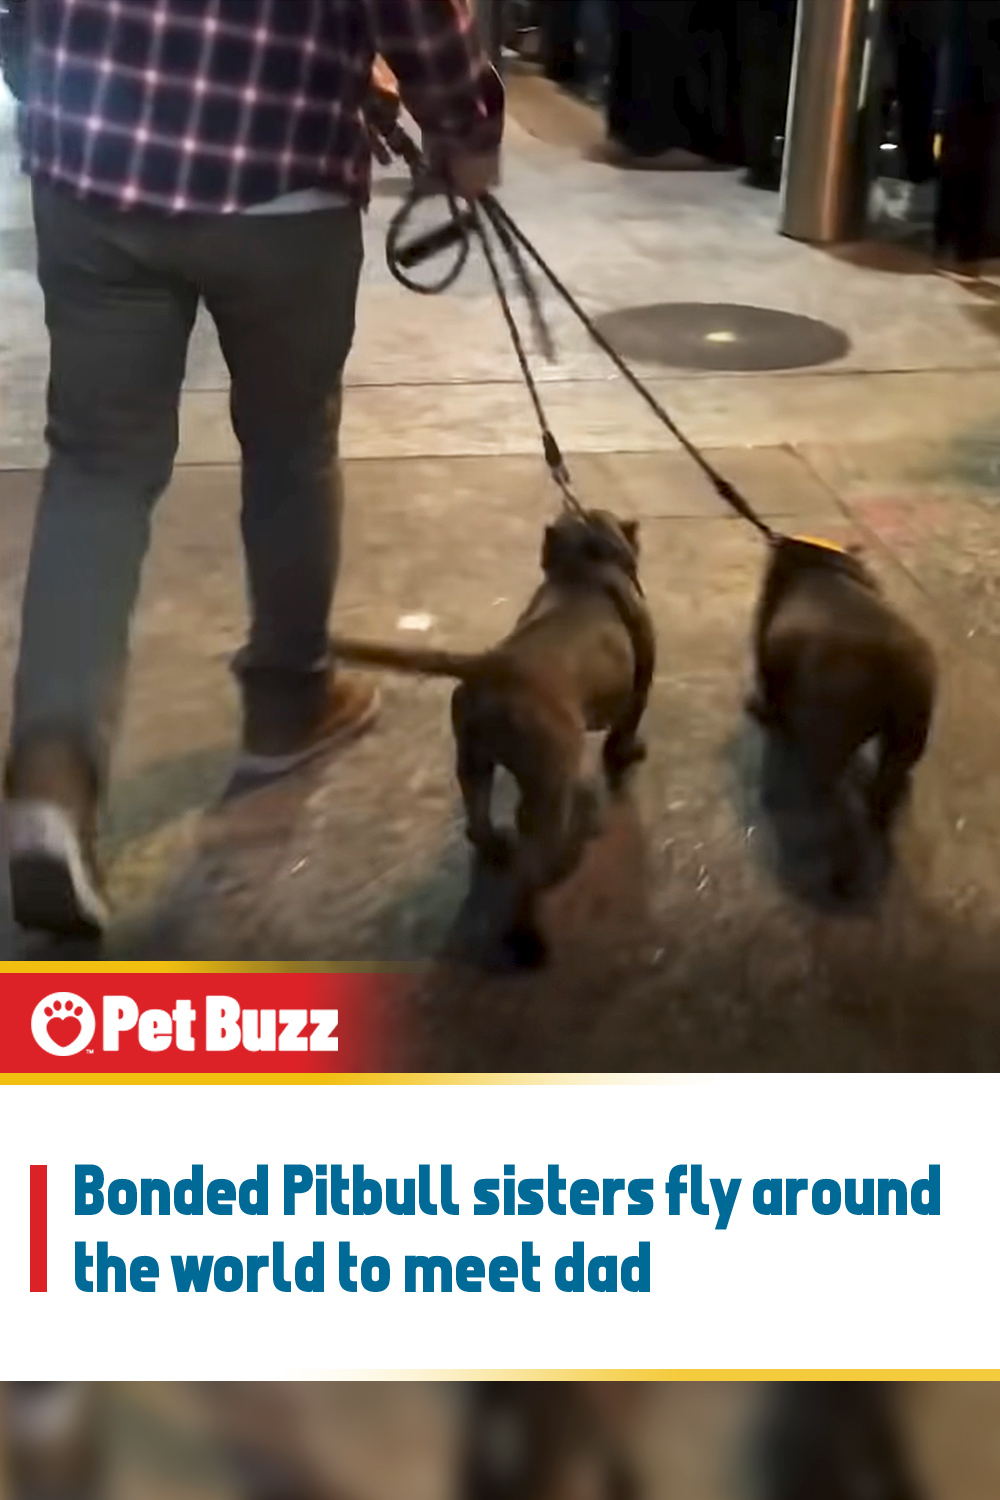 Bonded Pitbull sisters fly around the world to meet dad